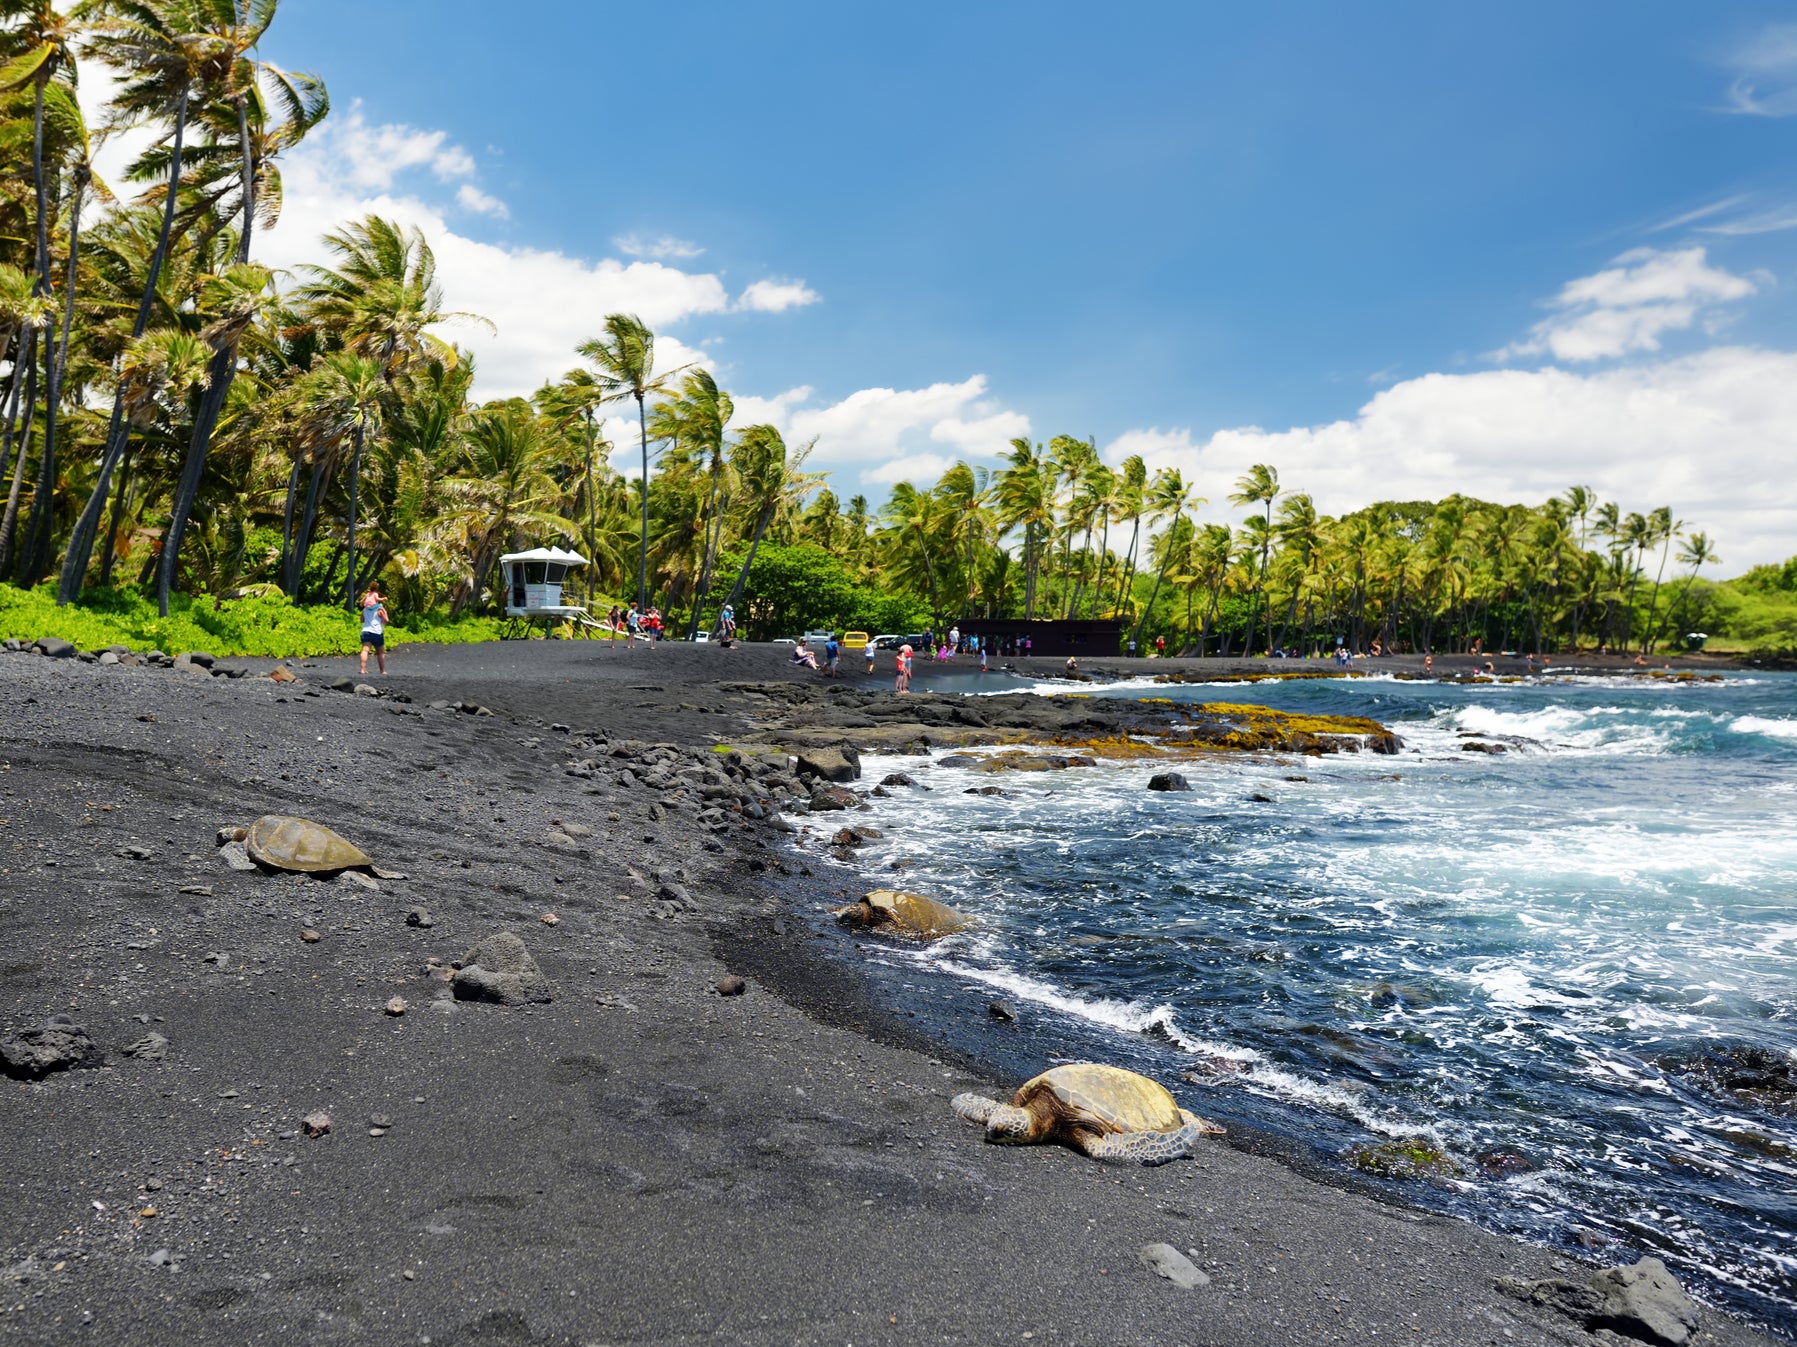 The black sand was formed after lava flowed from the nearby Hawaii Volcanoes National Park